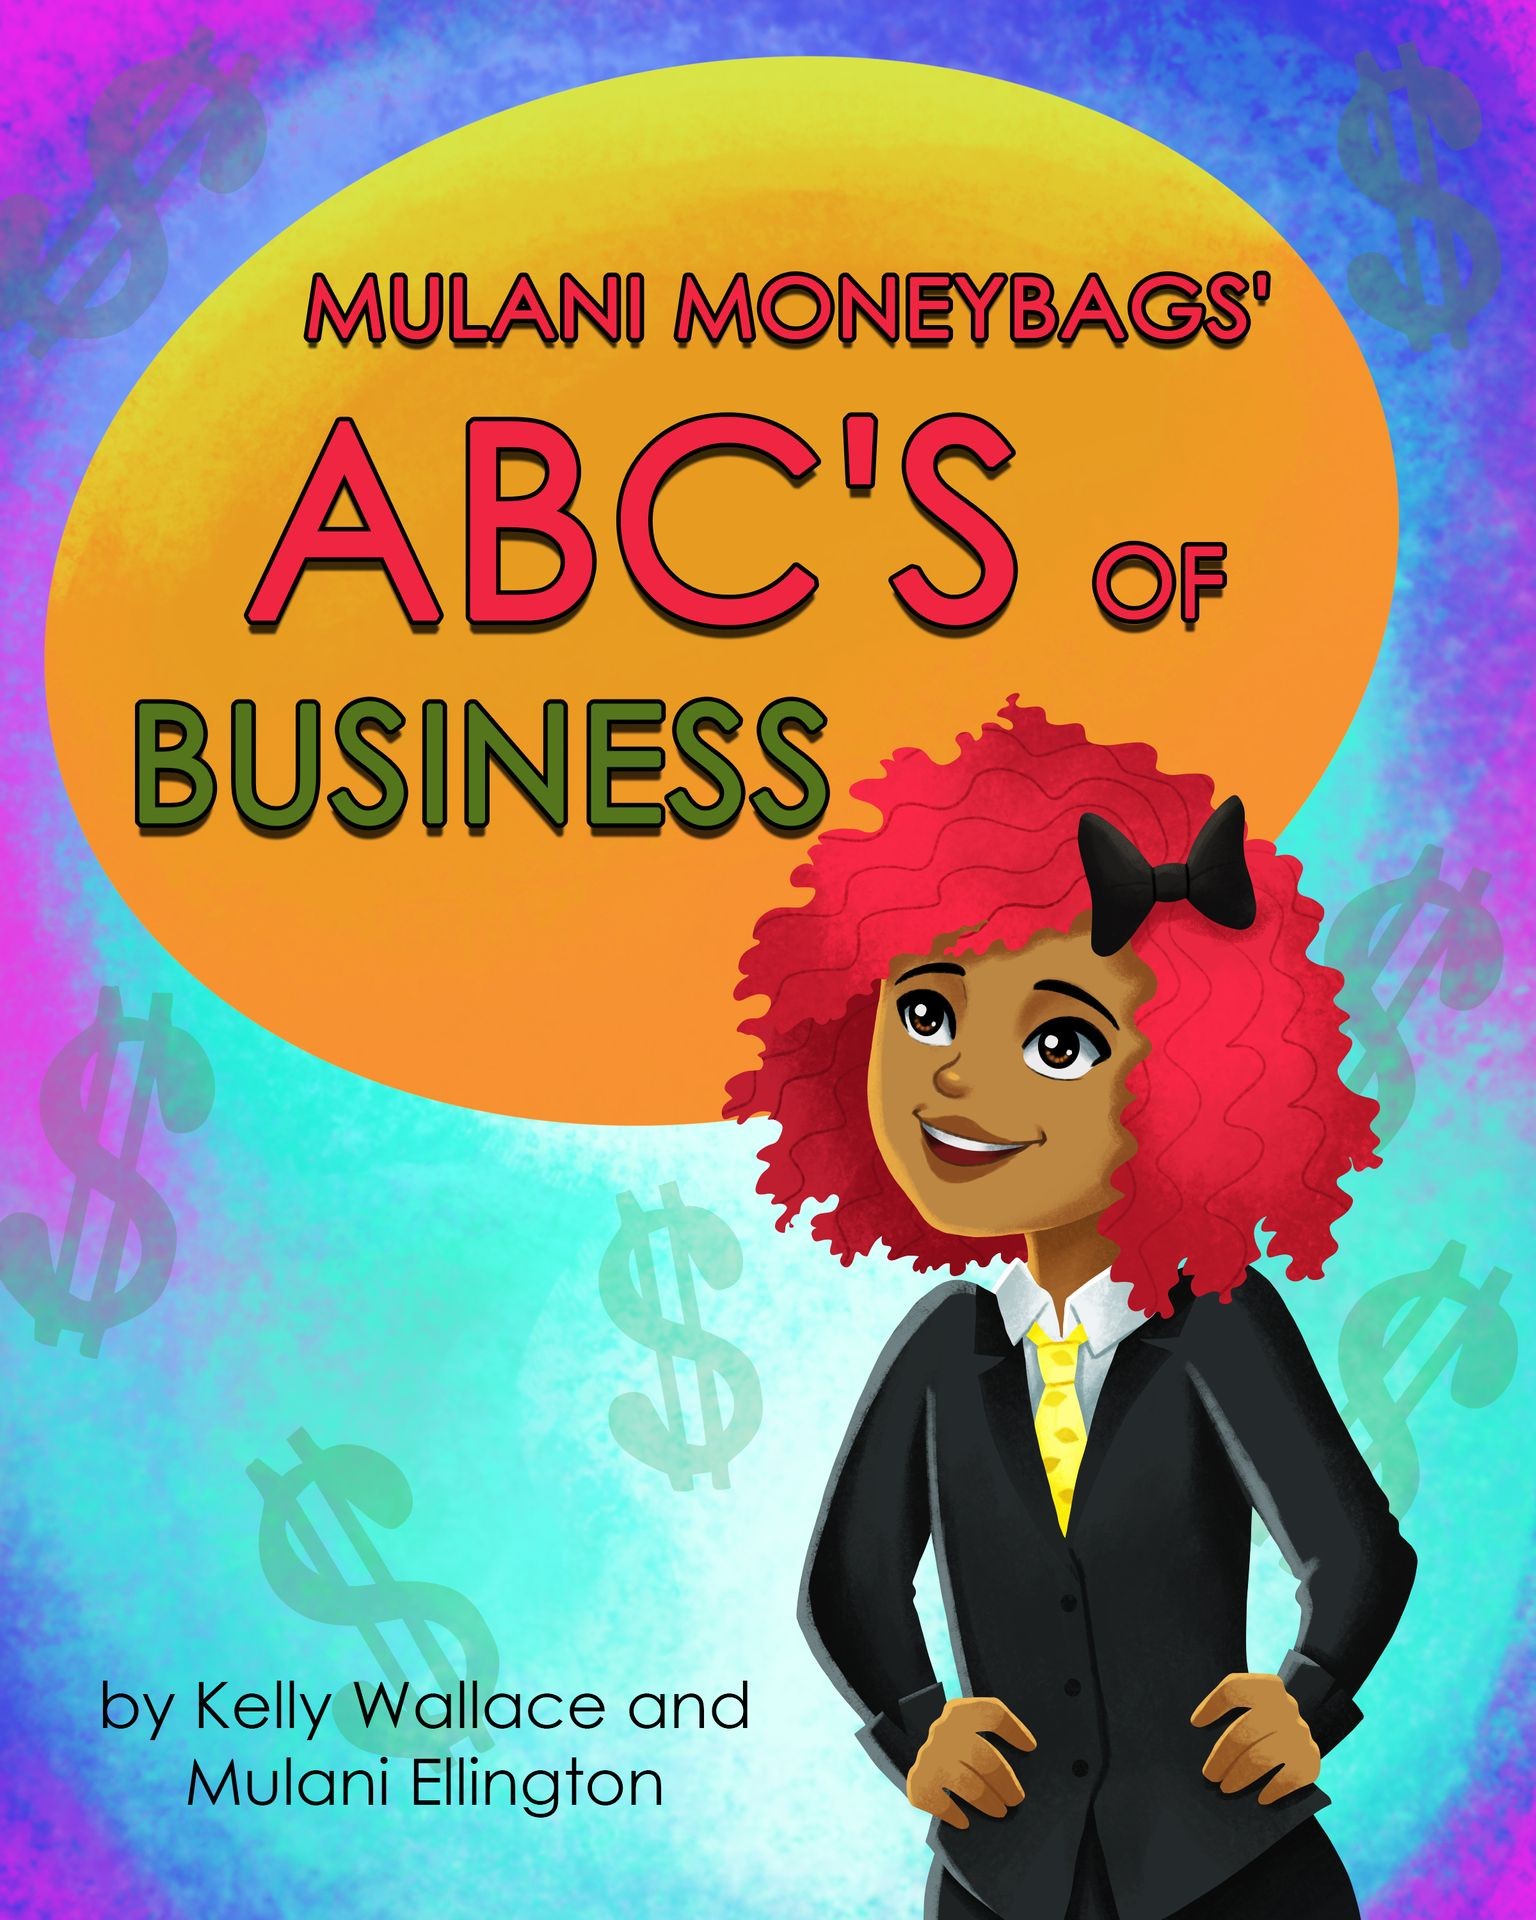 Mulani Moneybags ABC's of Business